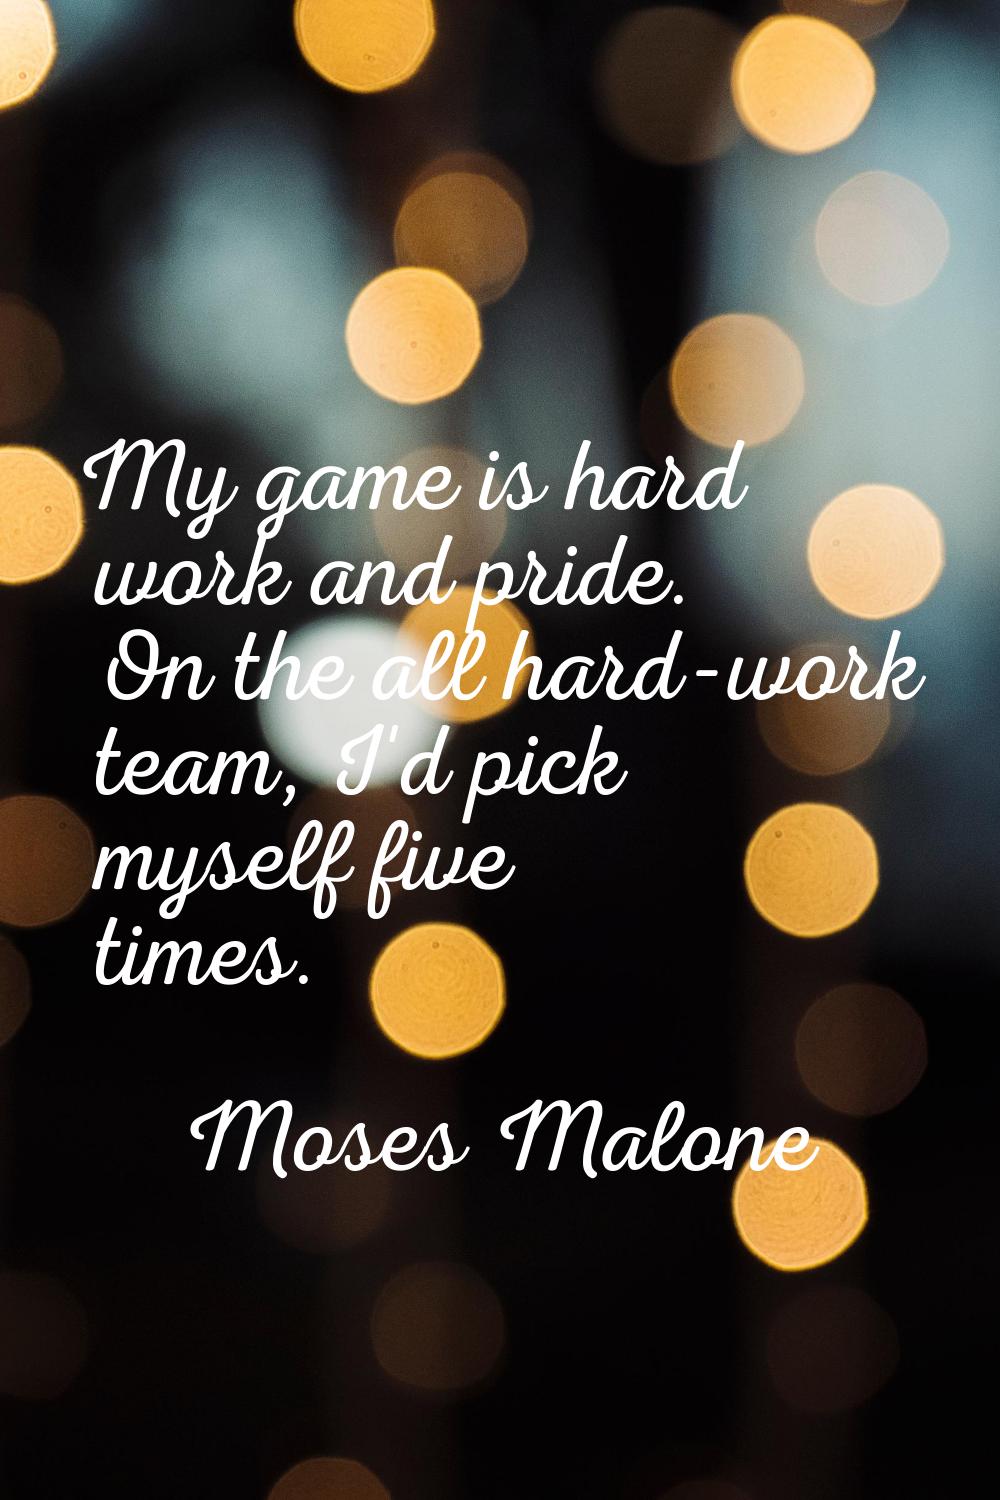 My game is hard work and pride. On the all hard-work team, I'd pick myself five times.